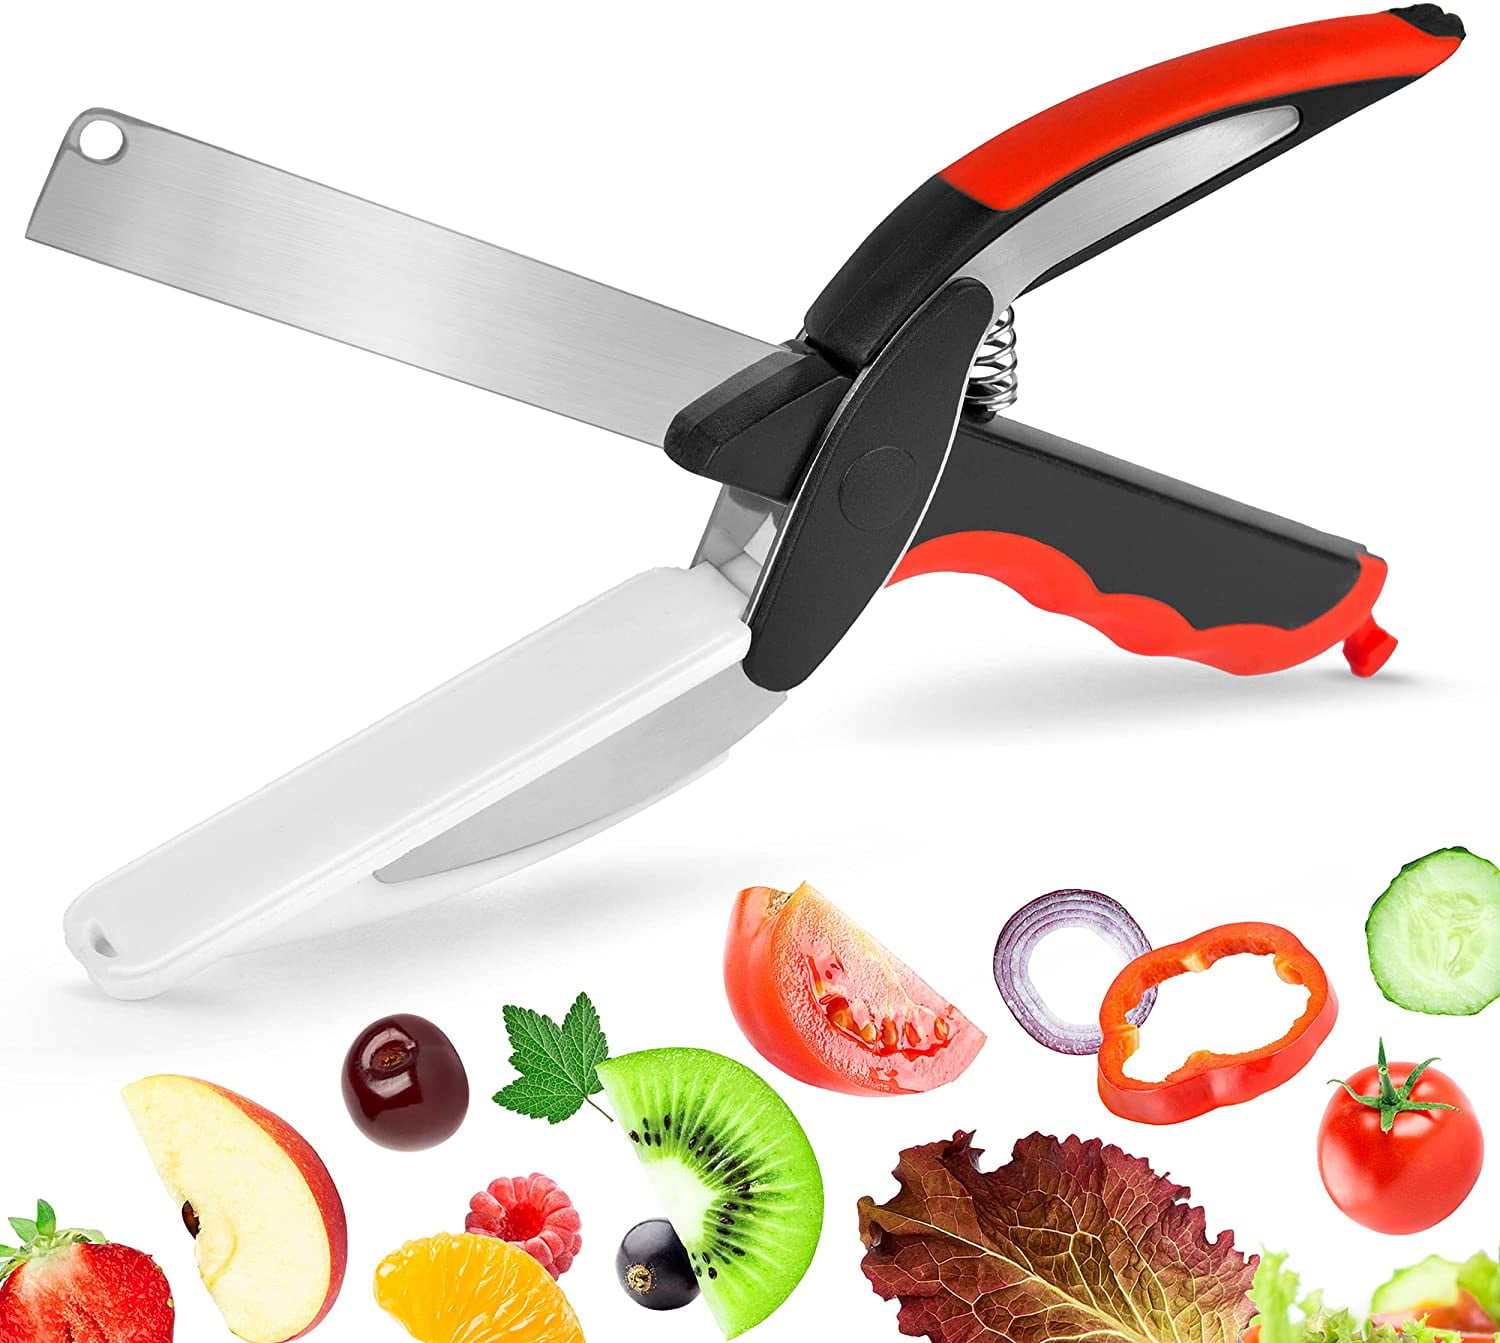 2 in 1 Smart Cutter for Chopping Fruits Easy Smart Cutter Herb Cutter 1 pc Vegetables Cheese Multipurpose Clever Chopper with Cutting Board Built-in Perfect for Picnics